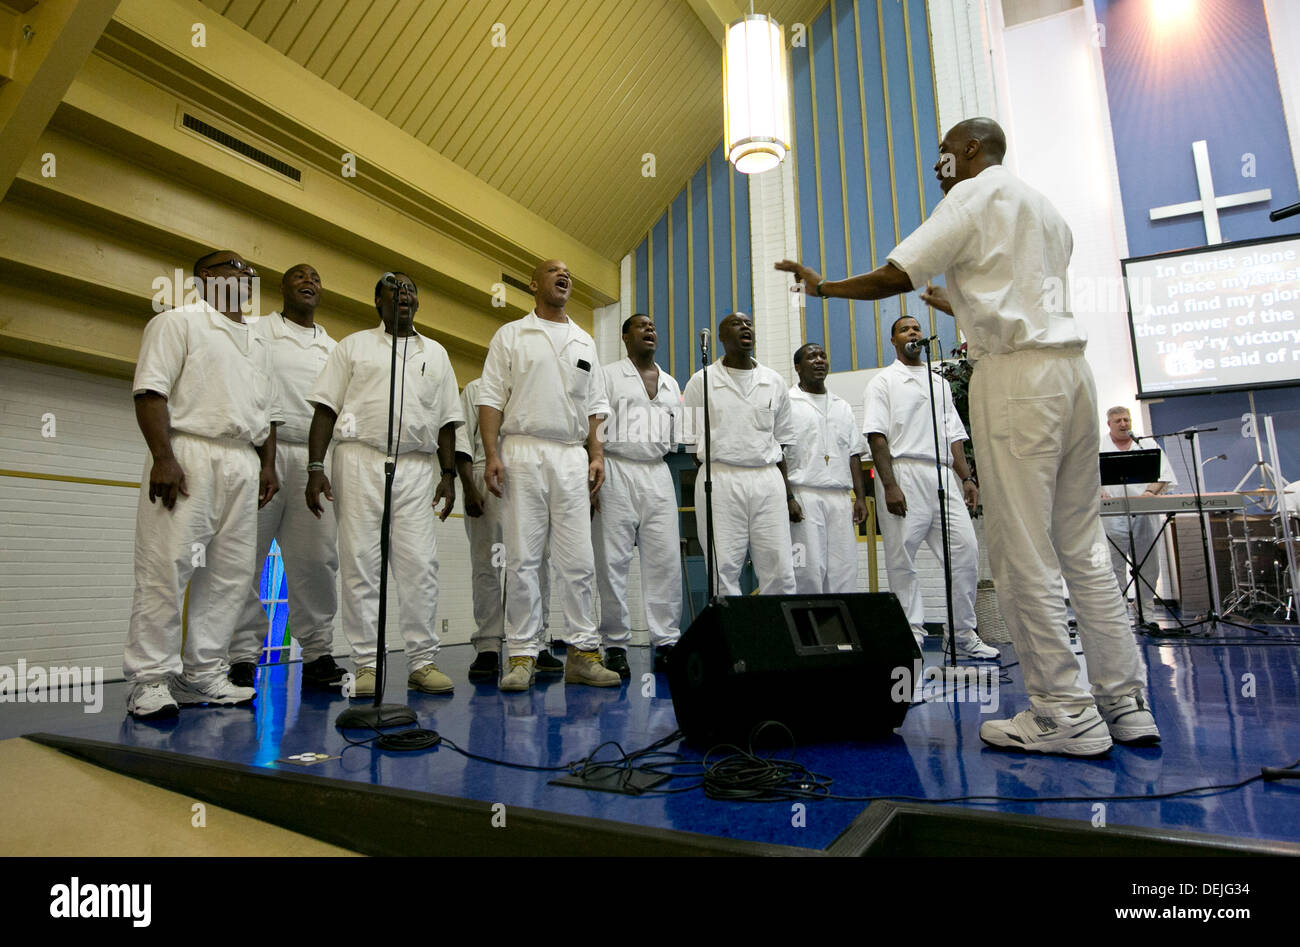 Male members of a prison choir and students at the Darrignton Unit Prison Seminary program perform during a convocation ceremony Stock Photo